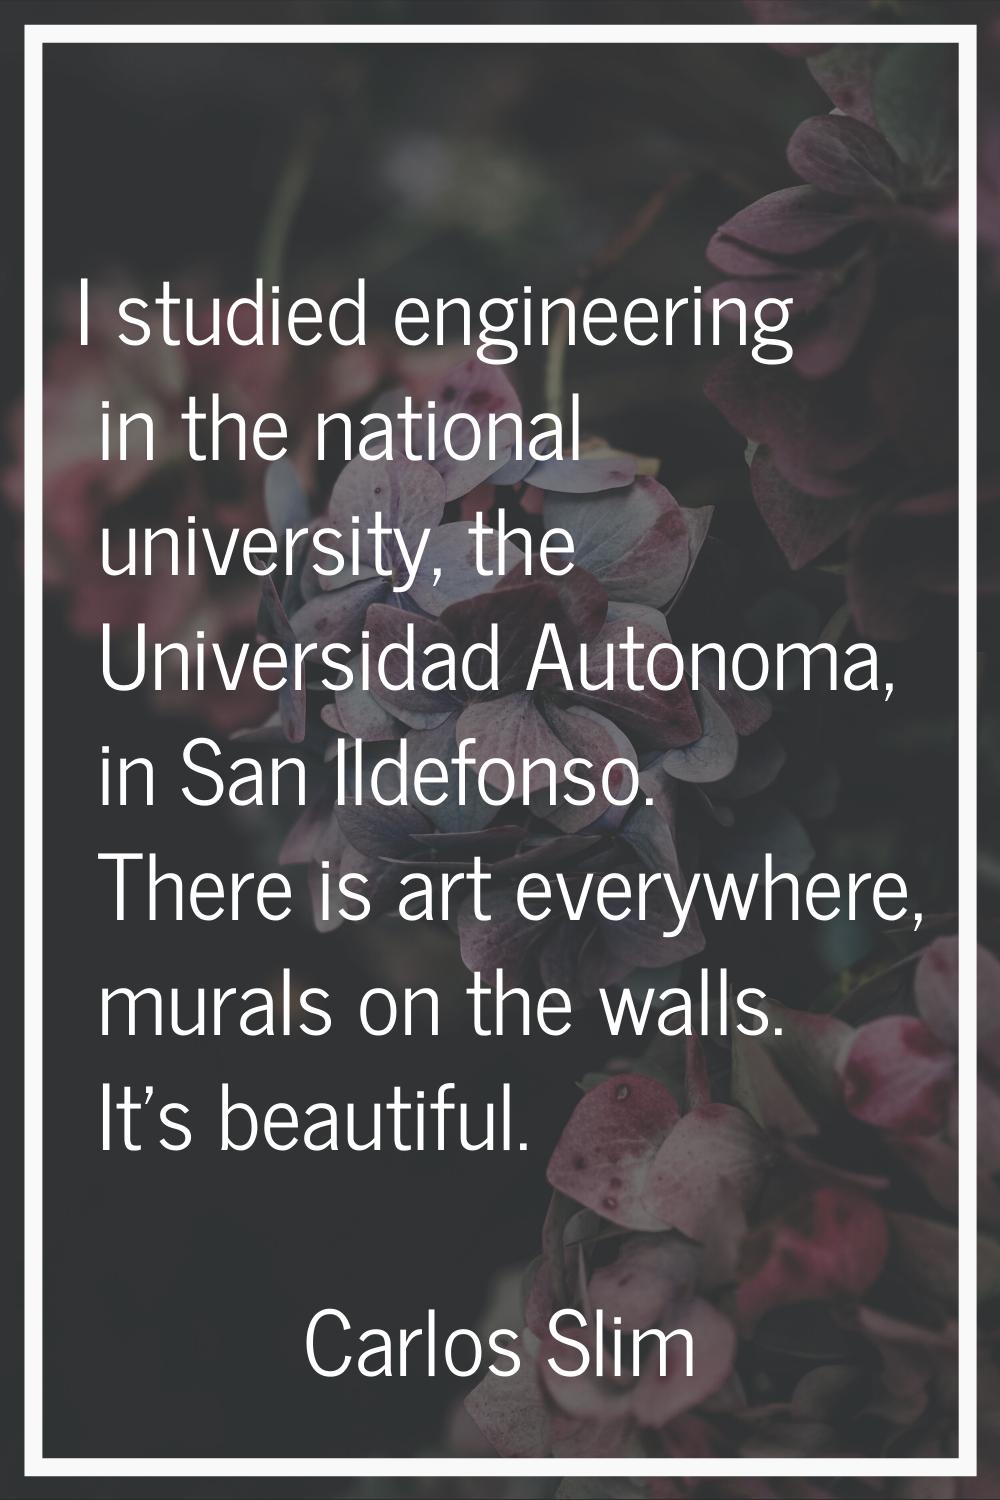 I studied engineering in the national university, the Universidad Autonoma, in San Ildefonso. There